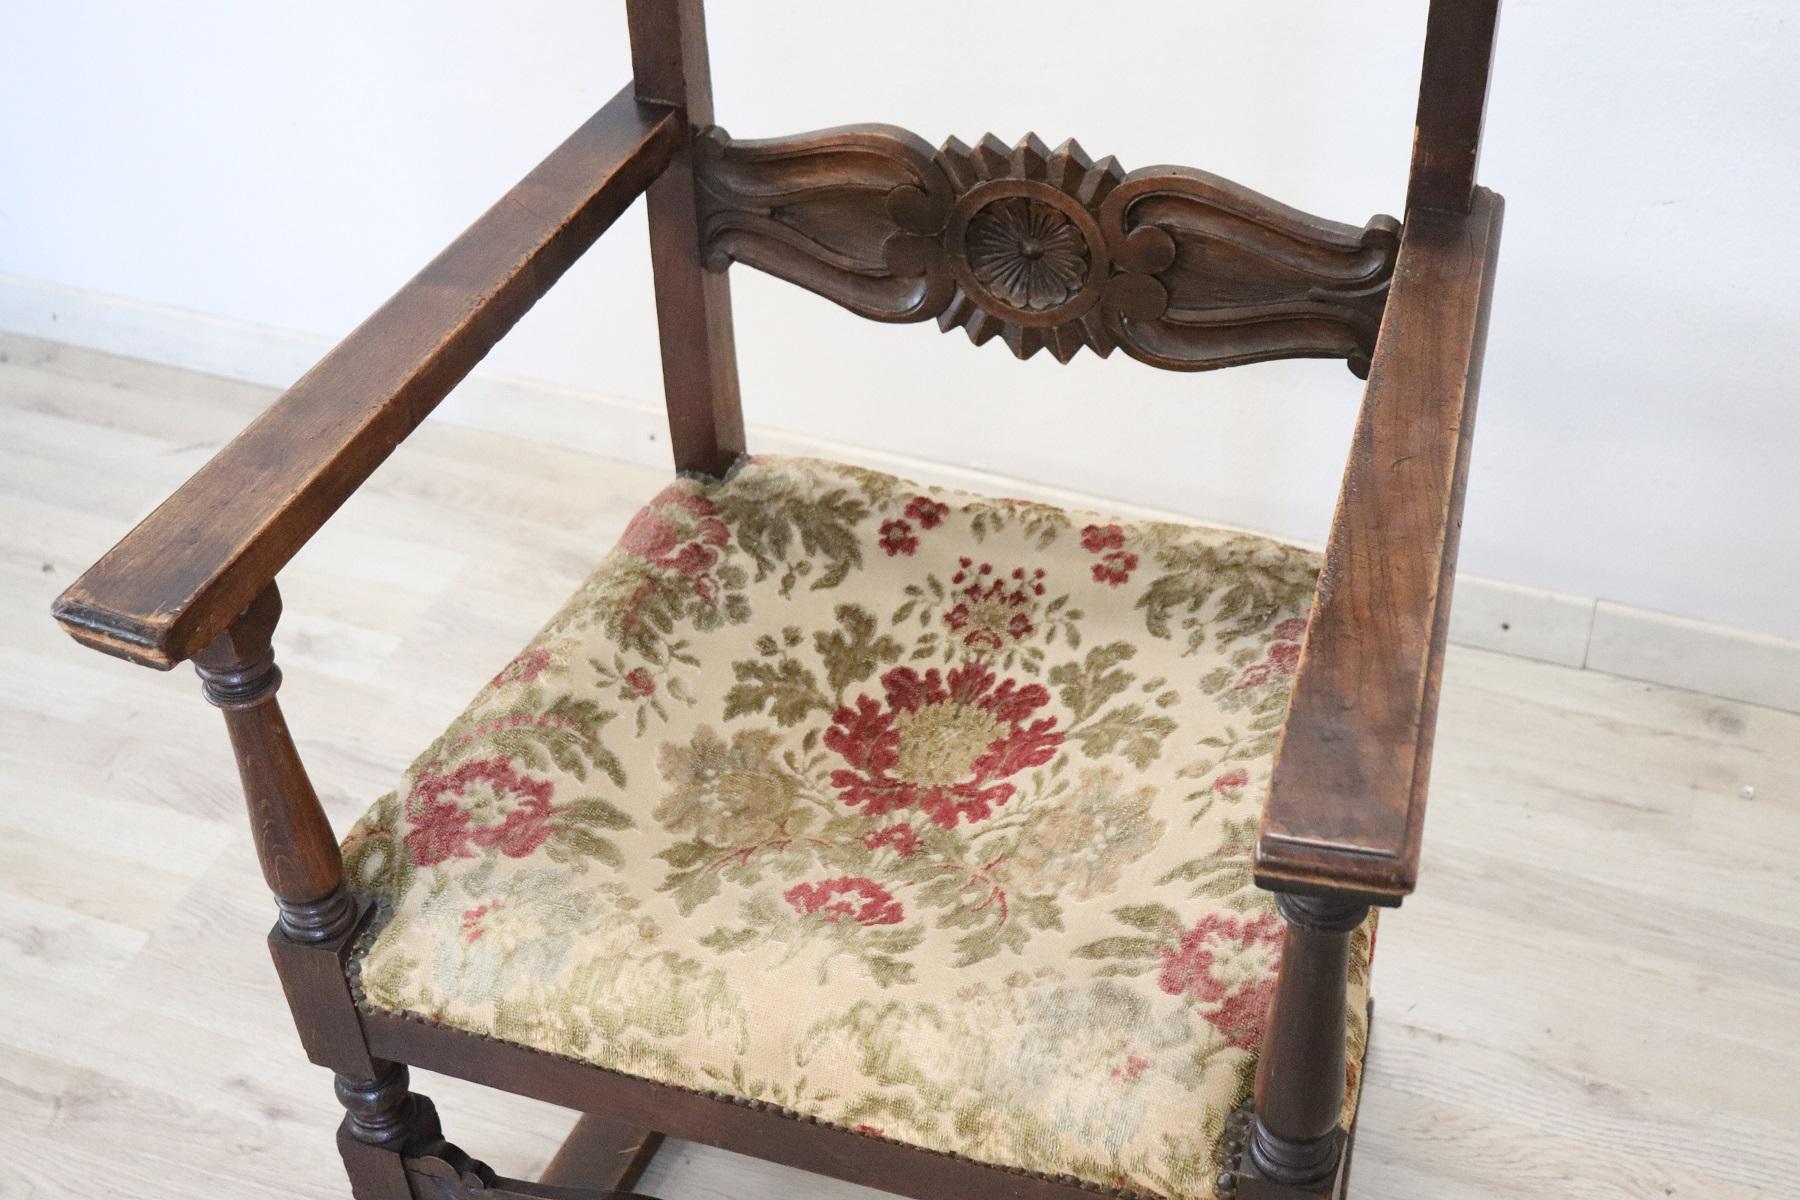 Beautiful antique rare Renaissance style armchair in carved oakwood. The armchair presents a work of wood carving of high artistic quality. The back is decorated the little feet are in the shape of lion's feet the legs are turned. Two comfortable